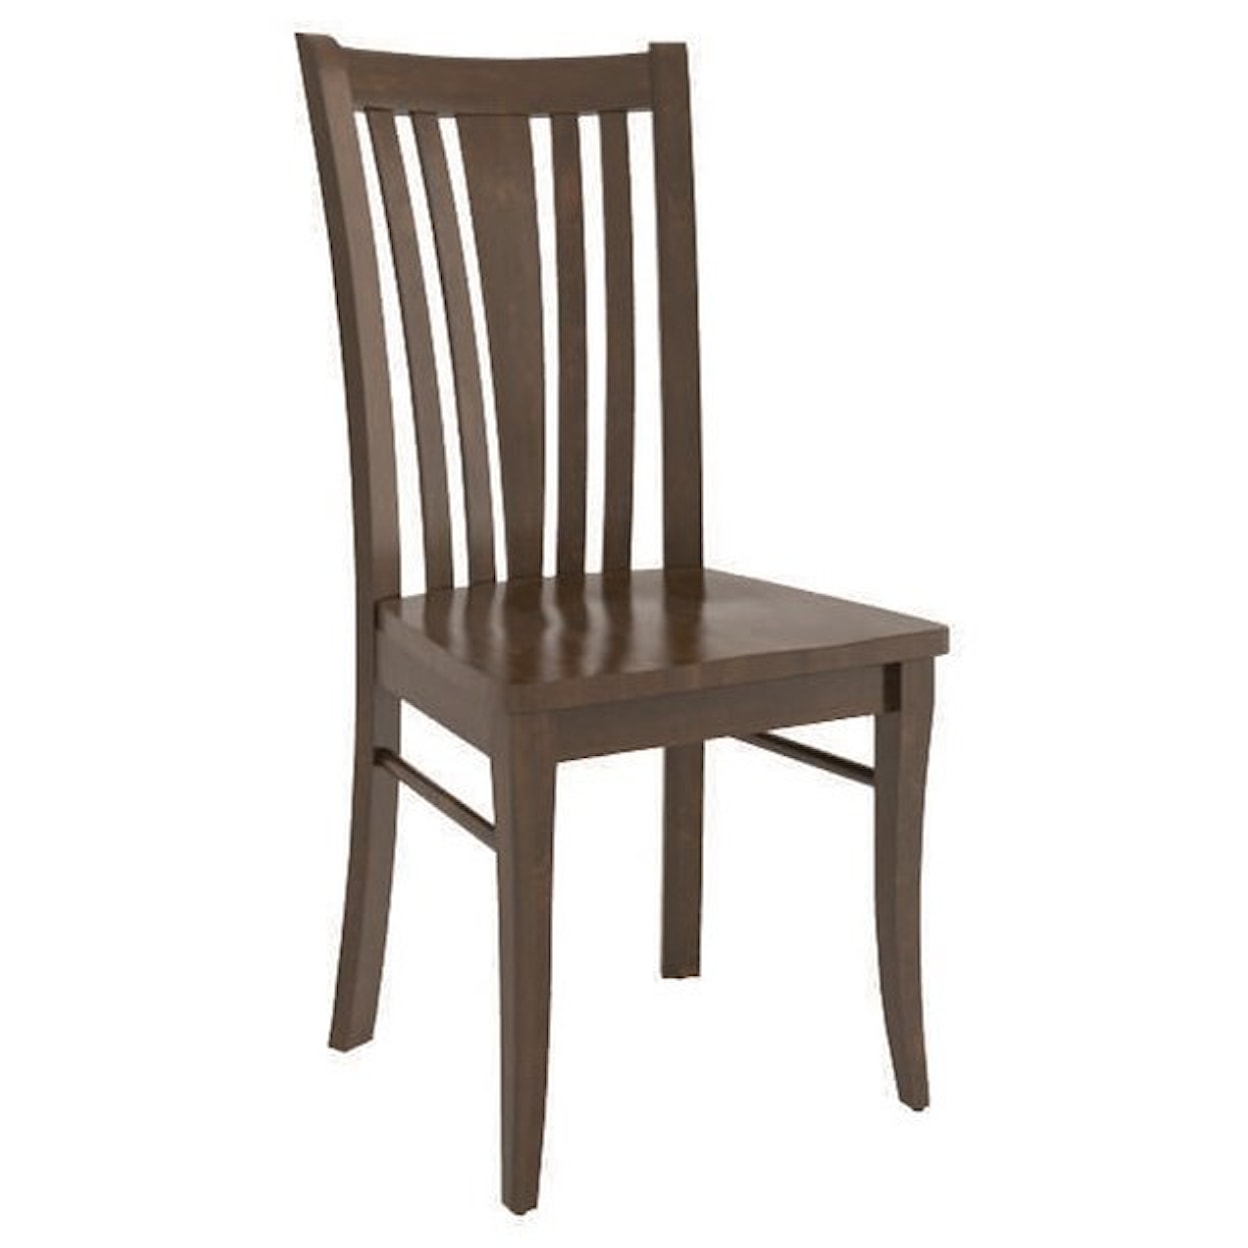 Canadel Canadel Customizable Dining Side Chair